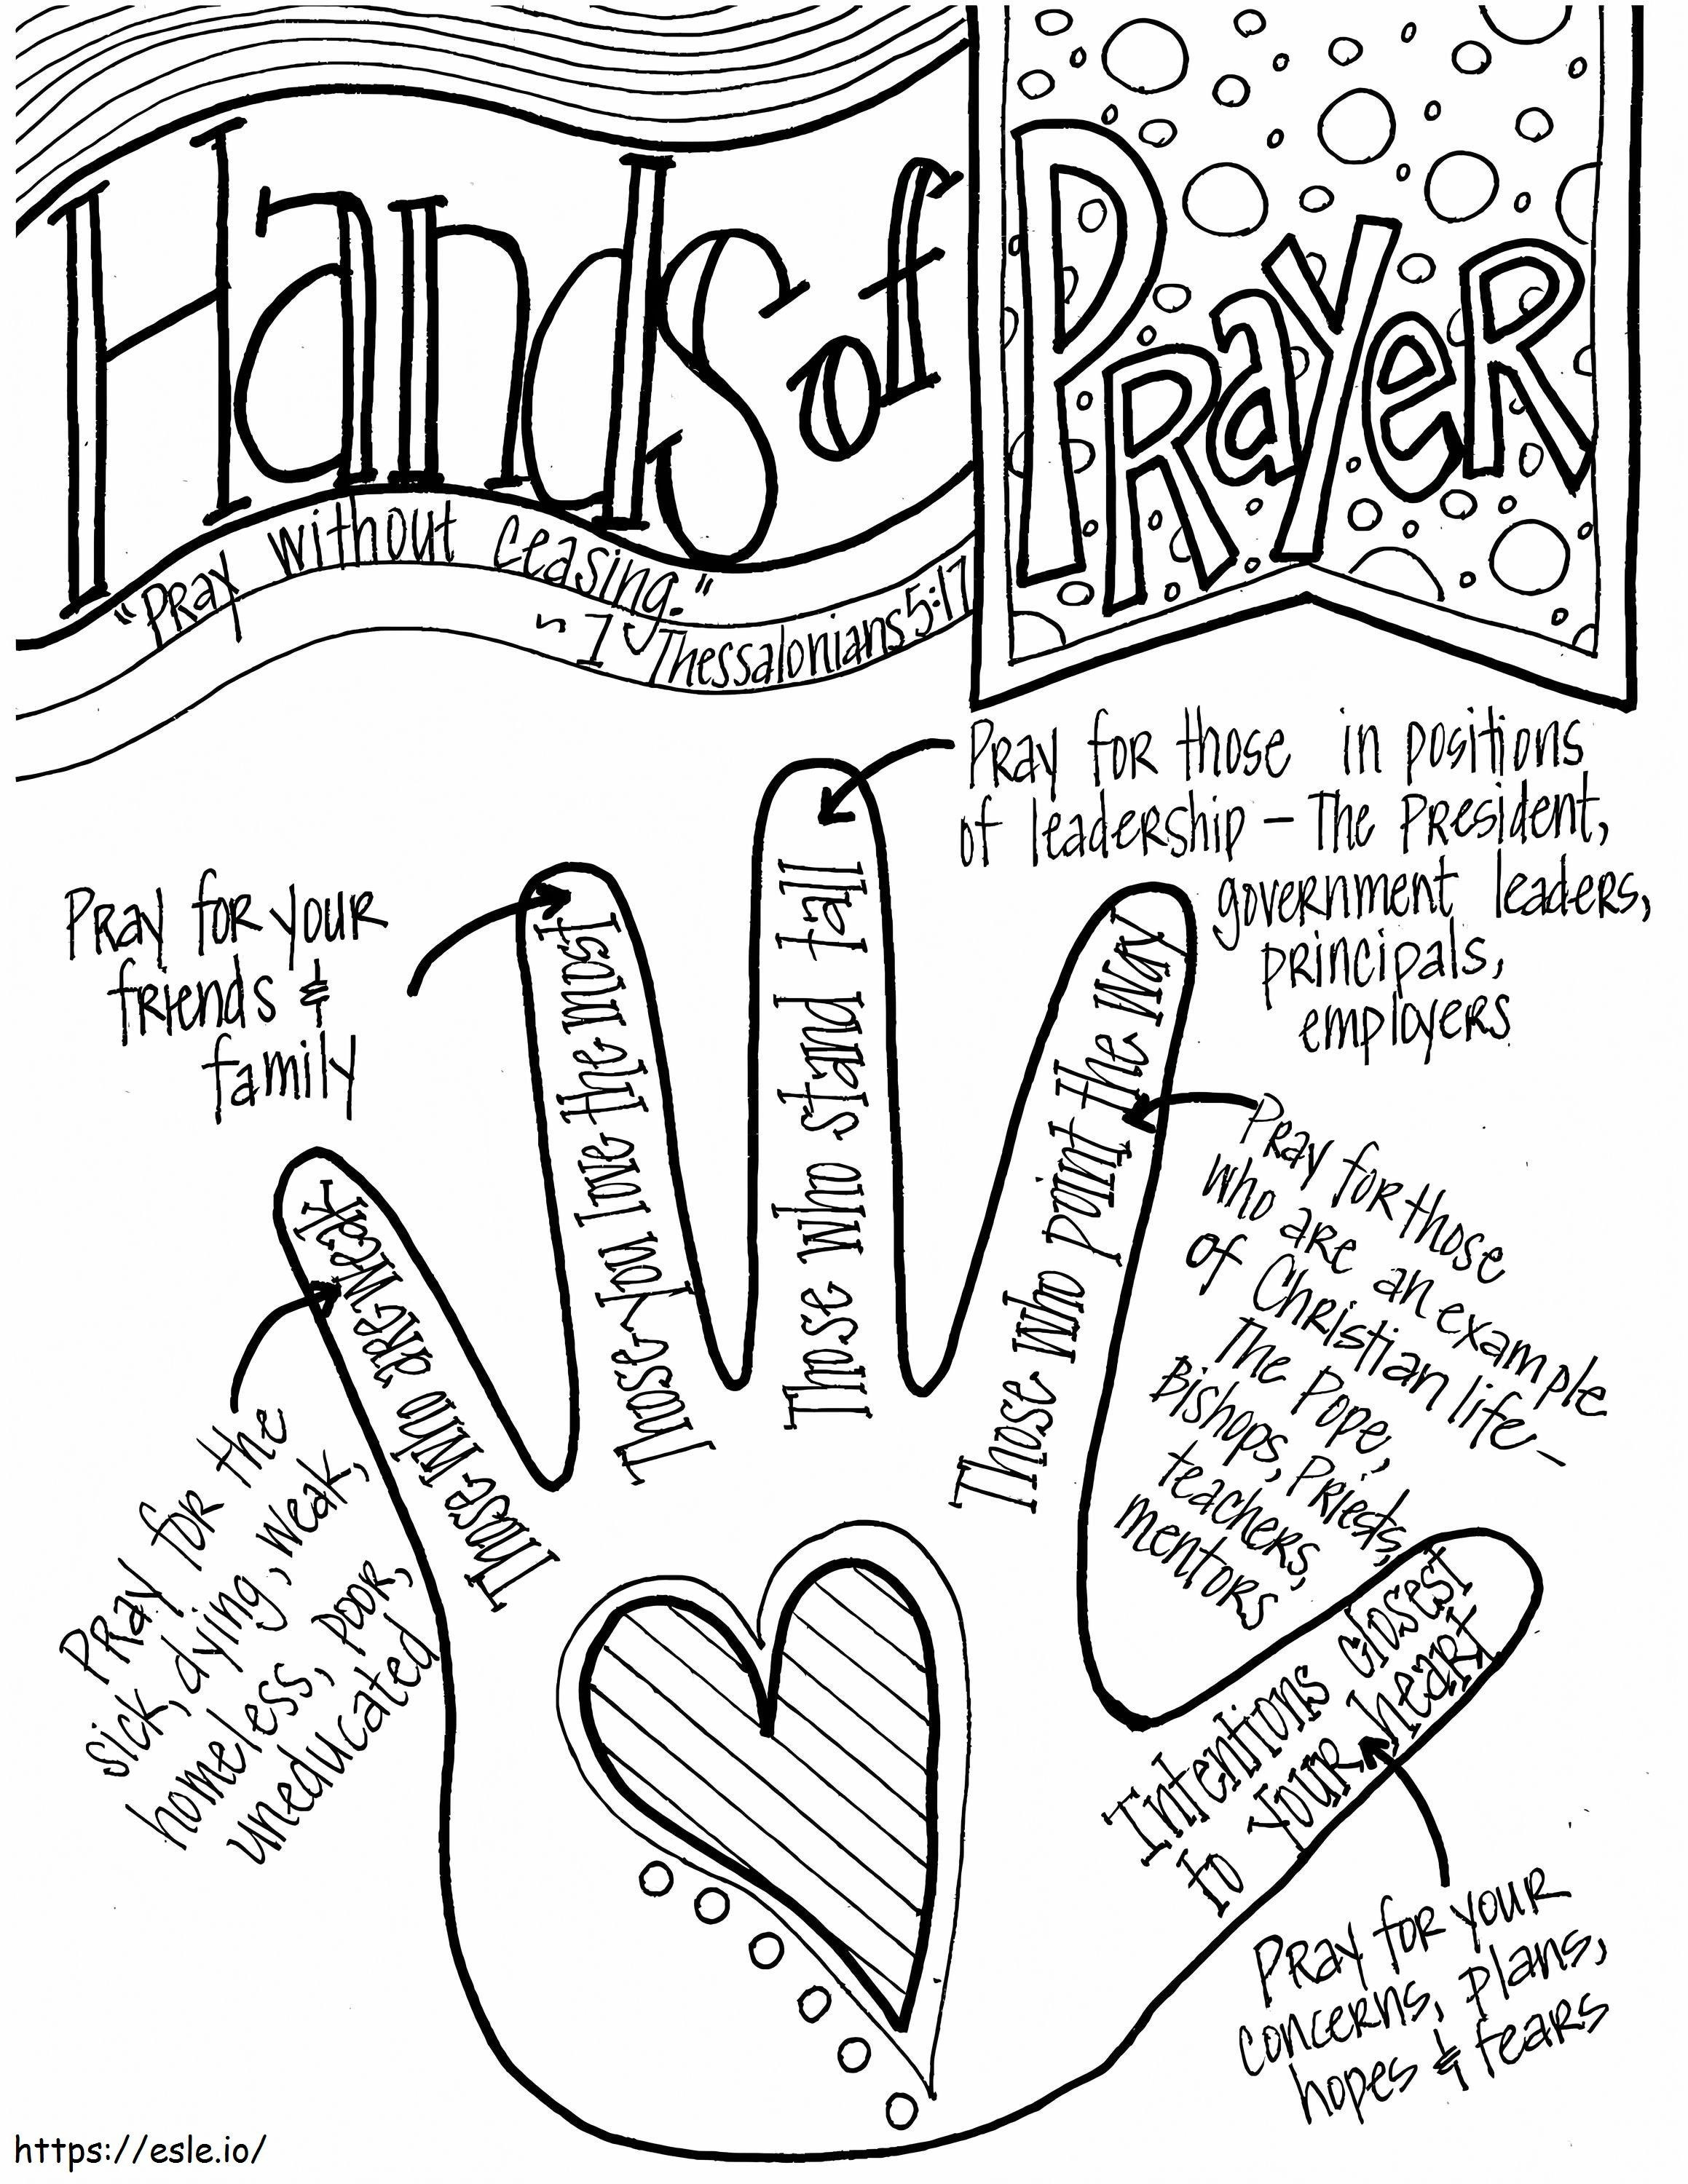 hands-of-prayer-coloring-page